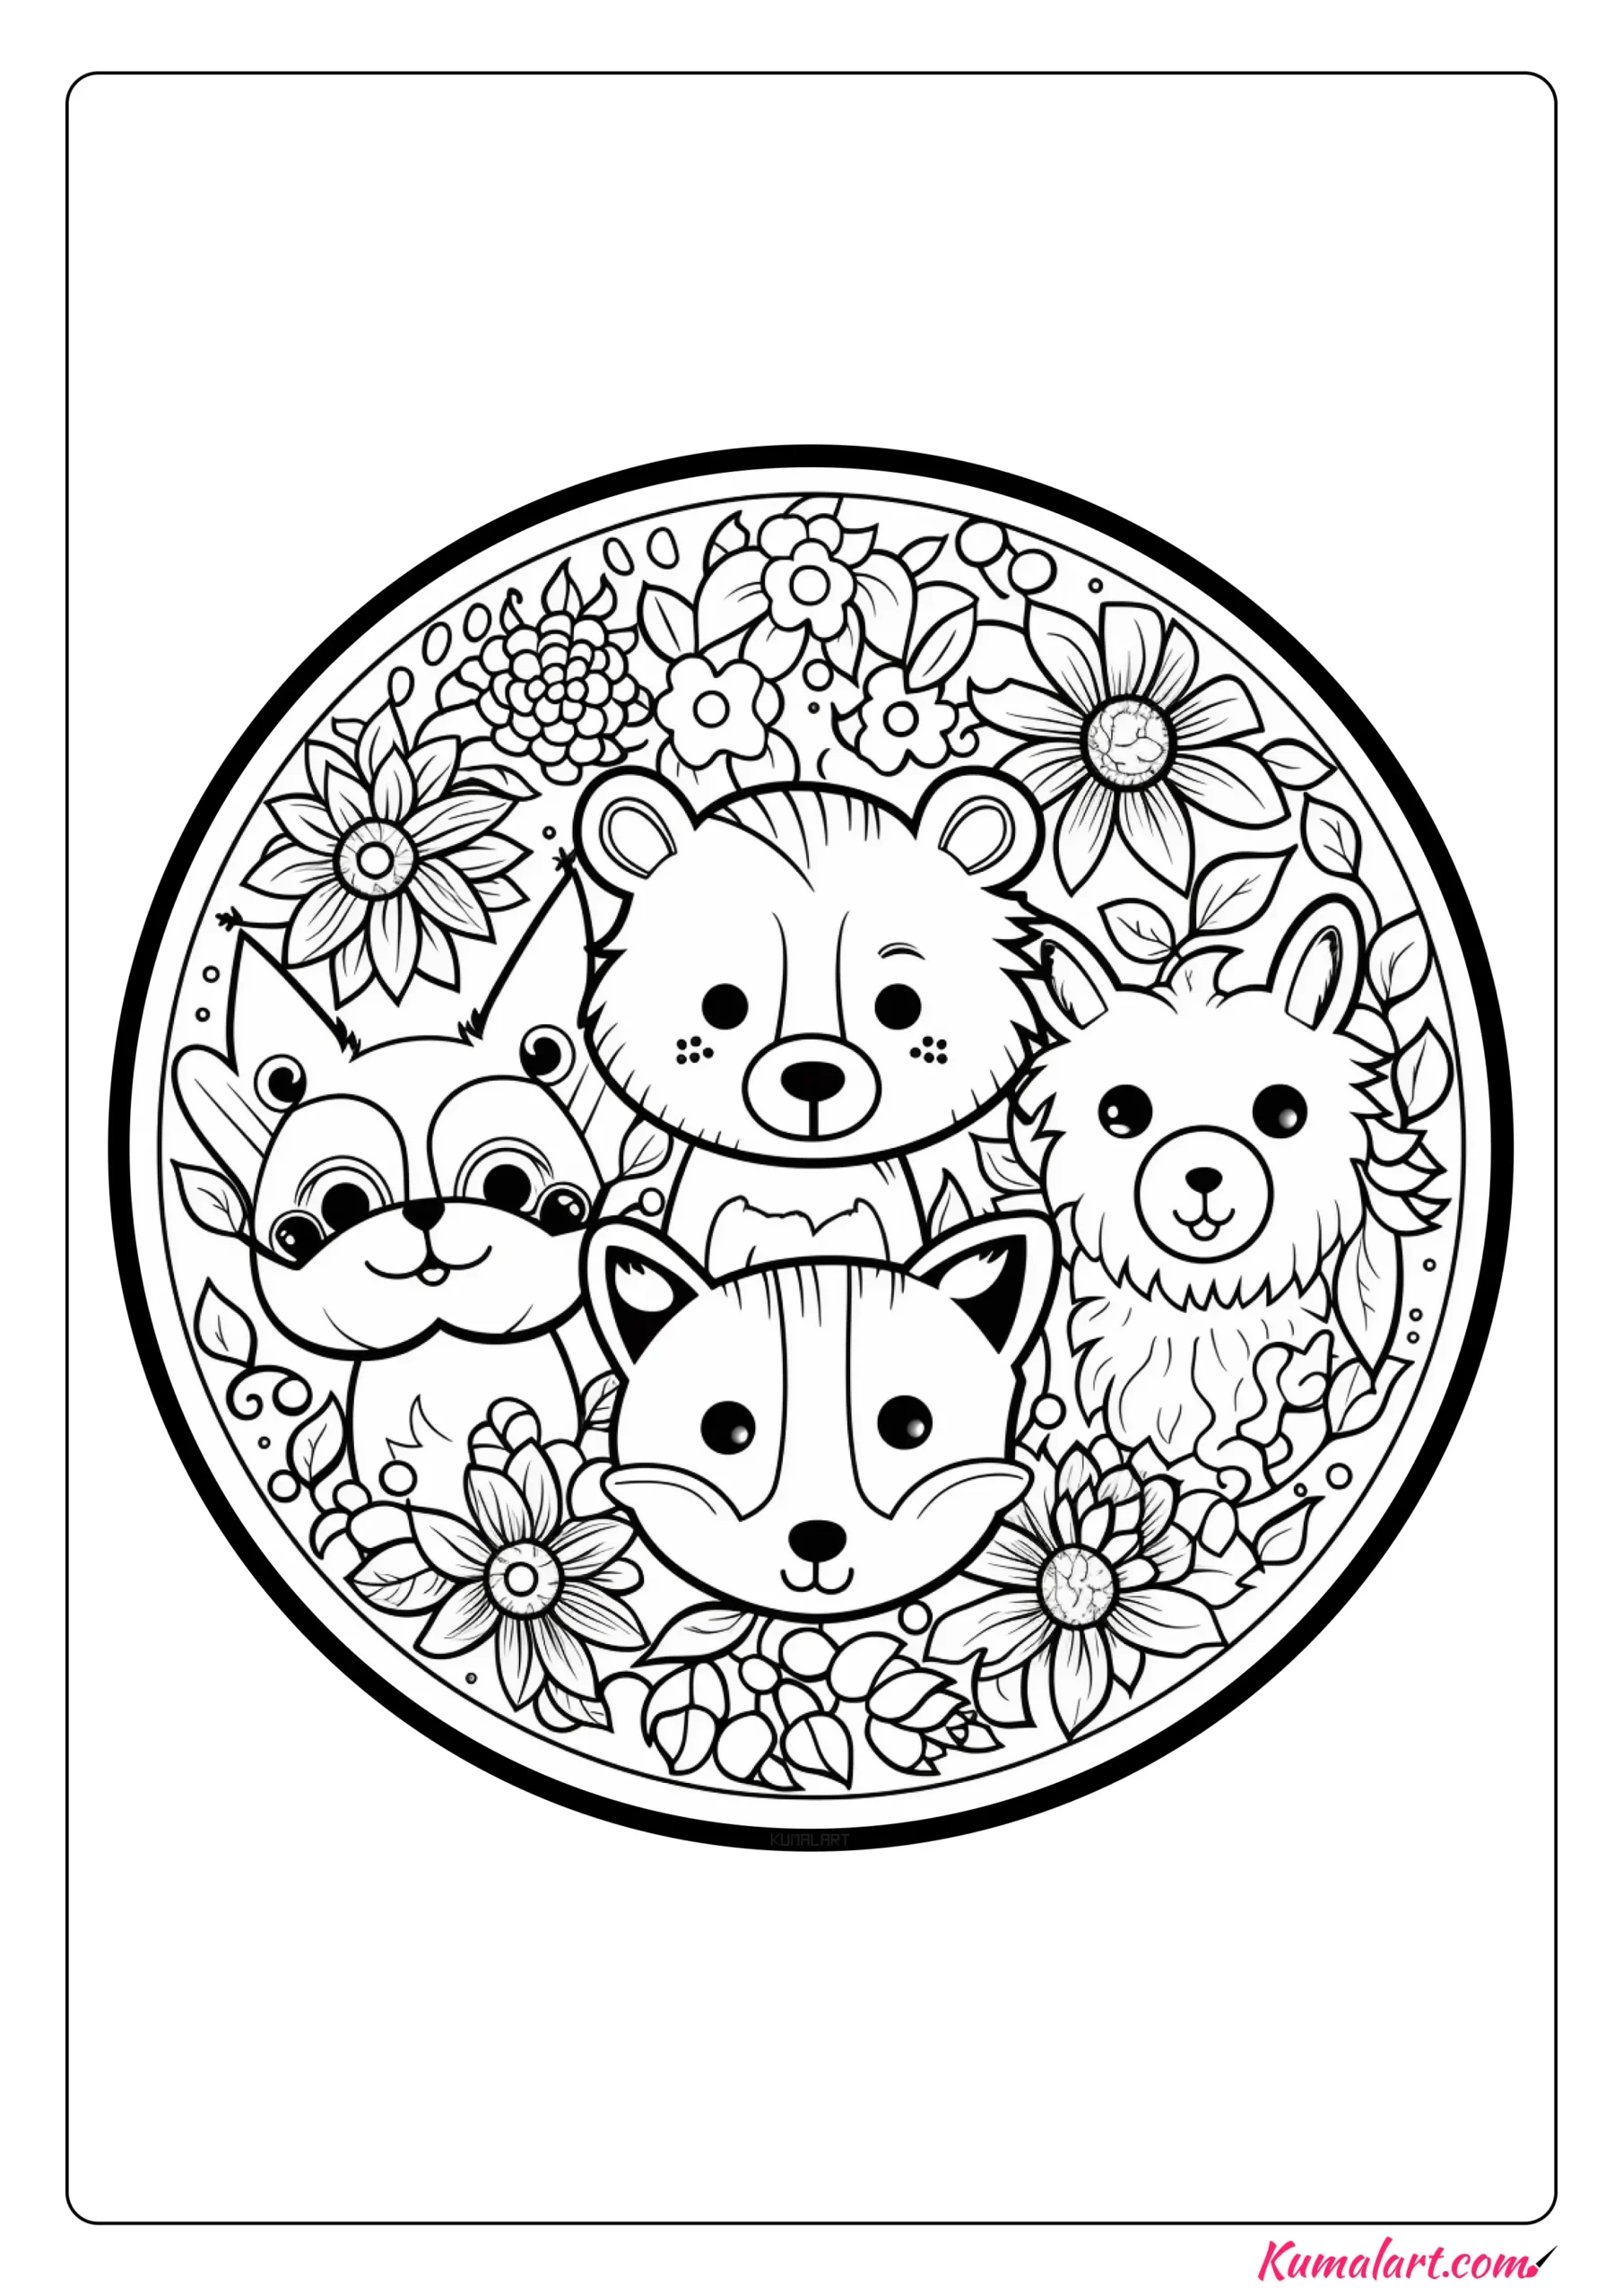 Lovely Cute Coloring Page